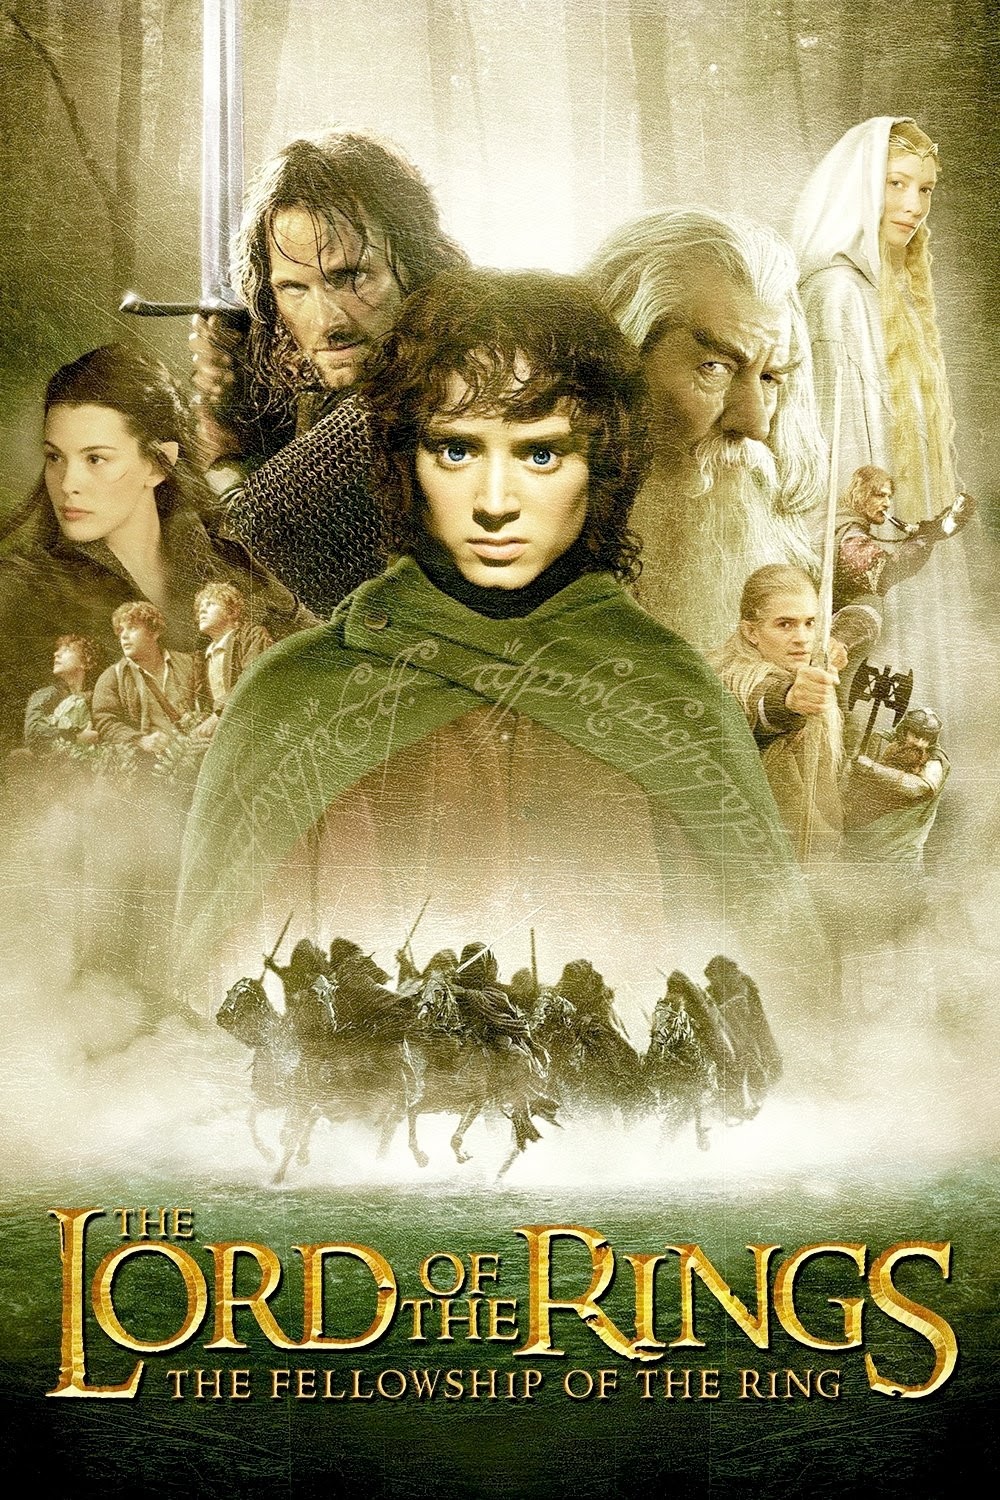 Download Film The Lord of the Rings: The Fellowship of the Ring (2001) BluRay 720p